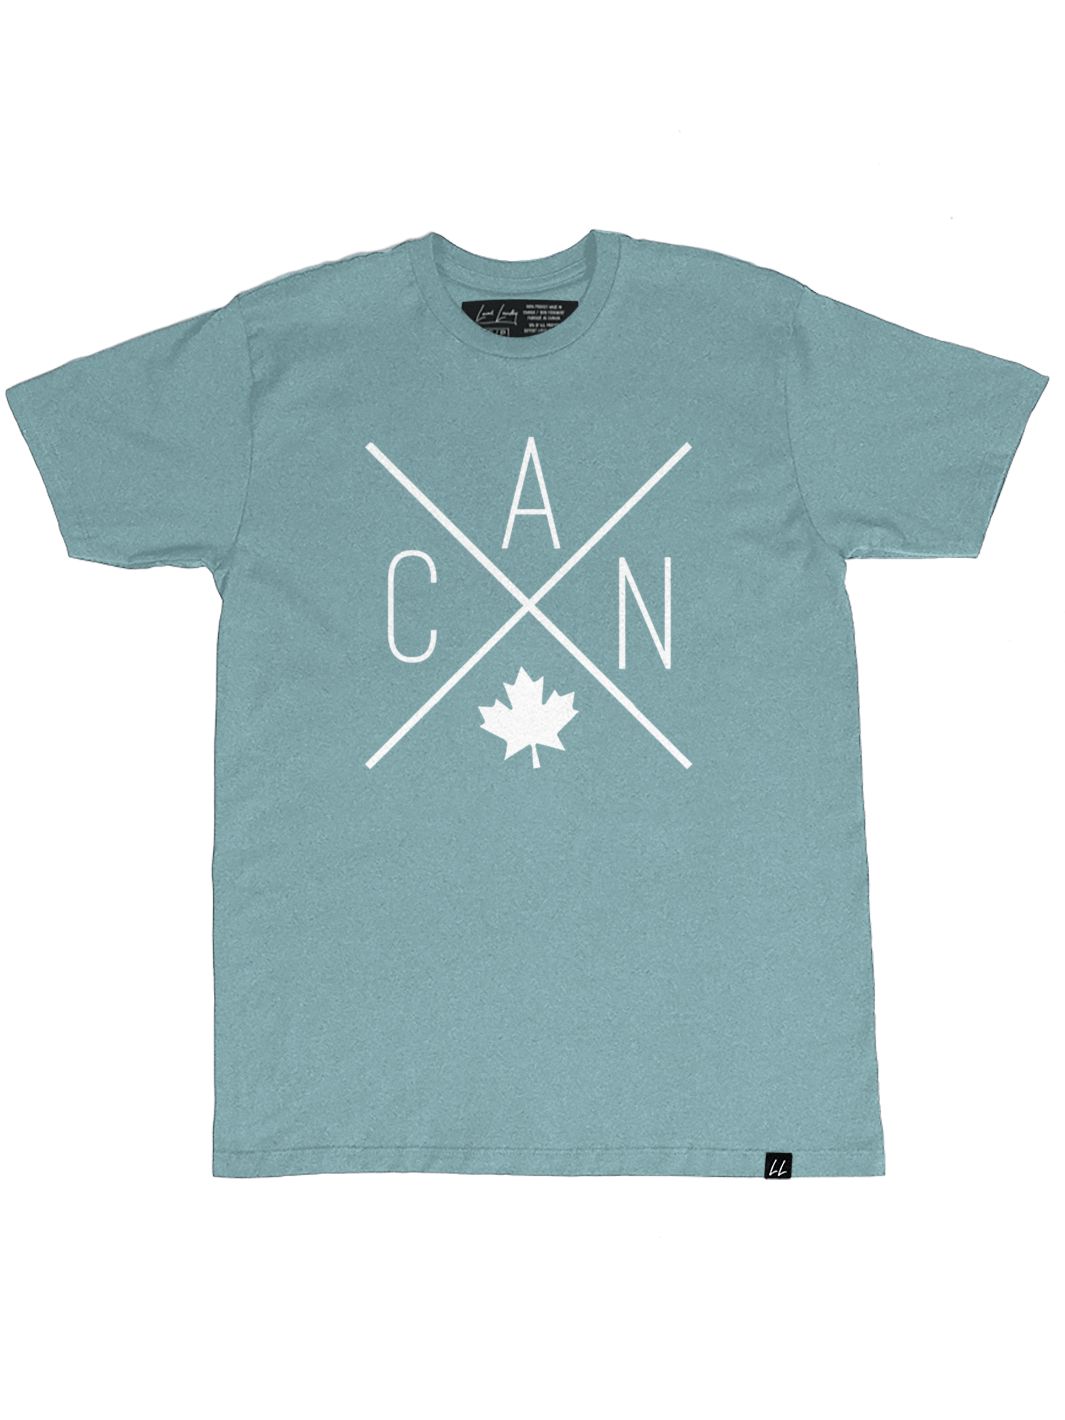 Green unisex Made in Canada shirt featuring the Local Laundry exclusive CAN Maple Leaf design. This tshirt represents  sustainable fashion that supports local communities.